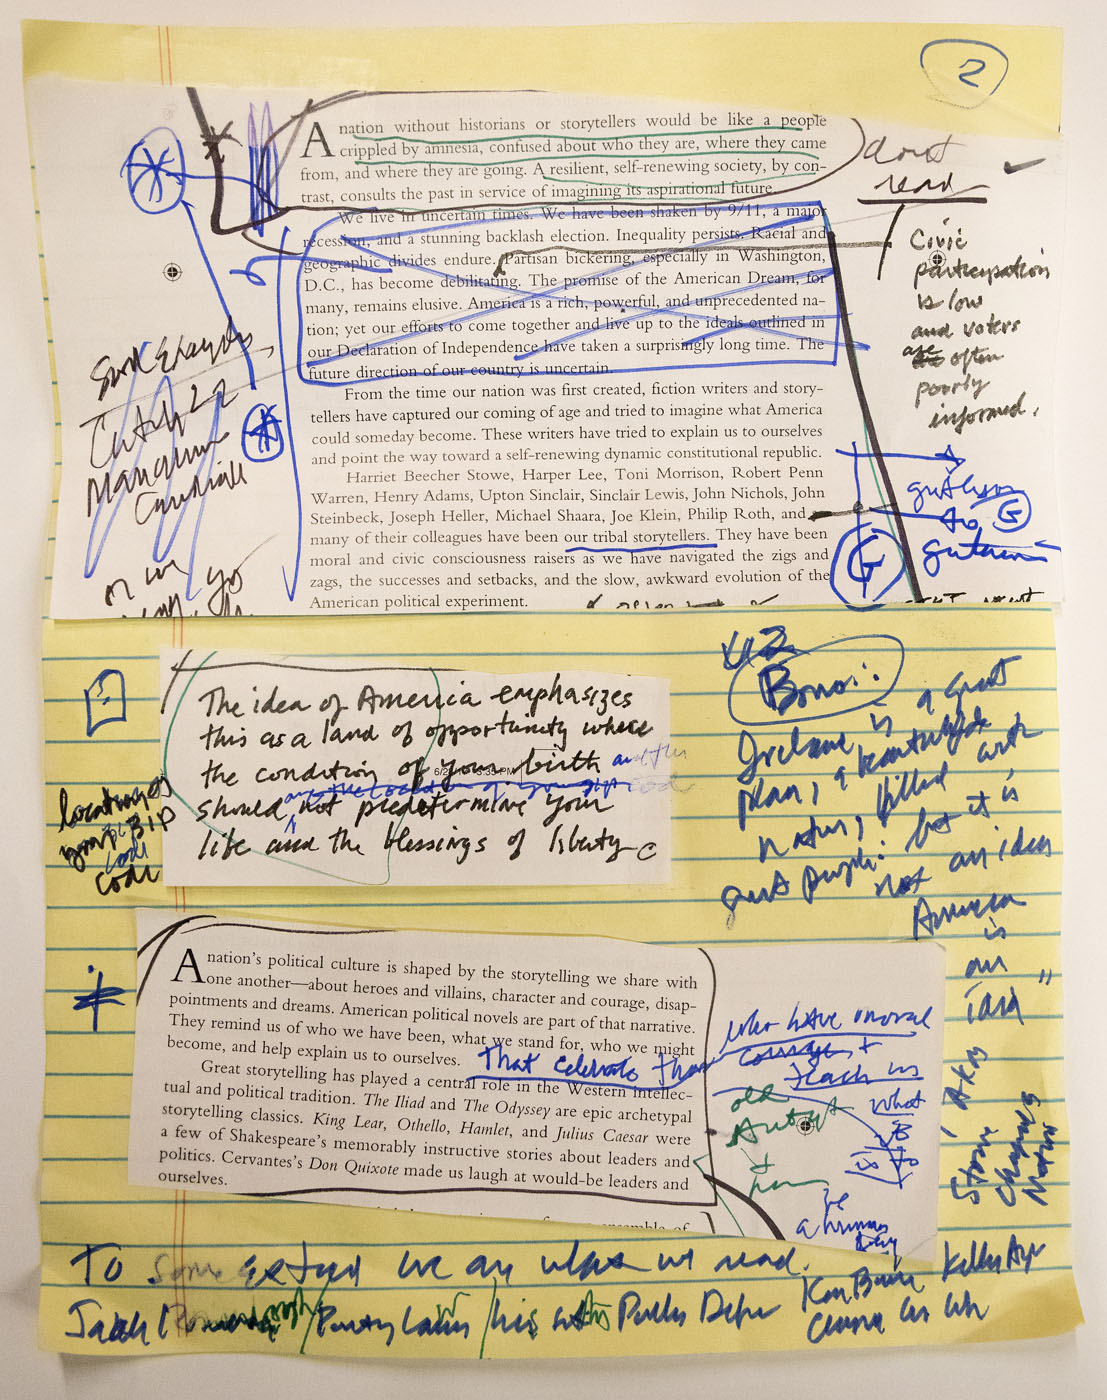 Pictured are notes from the final lecture that Cronin gave.